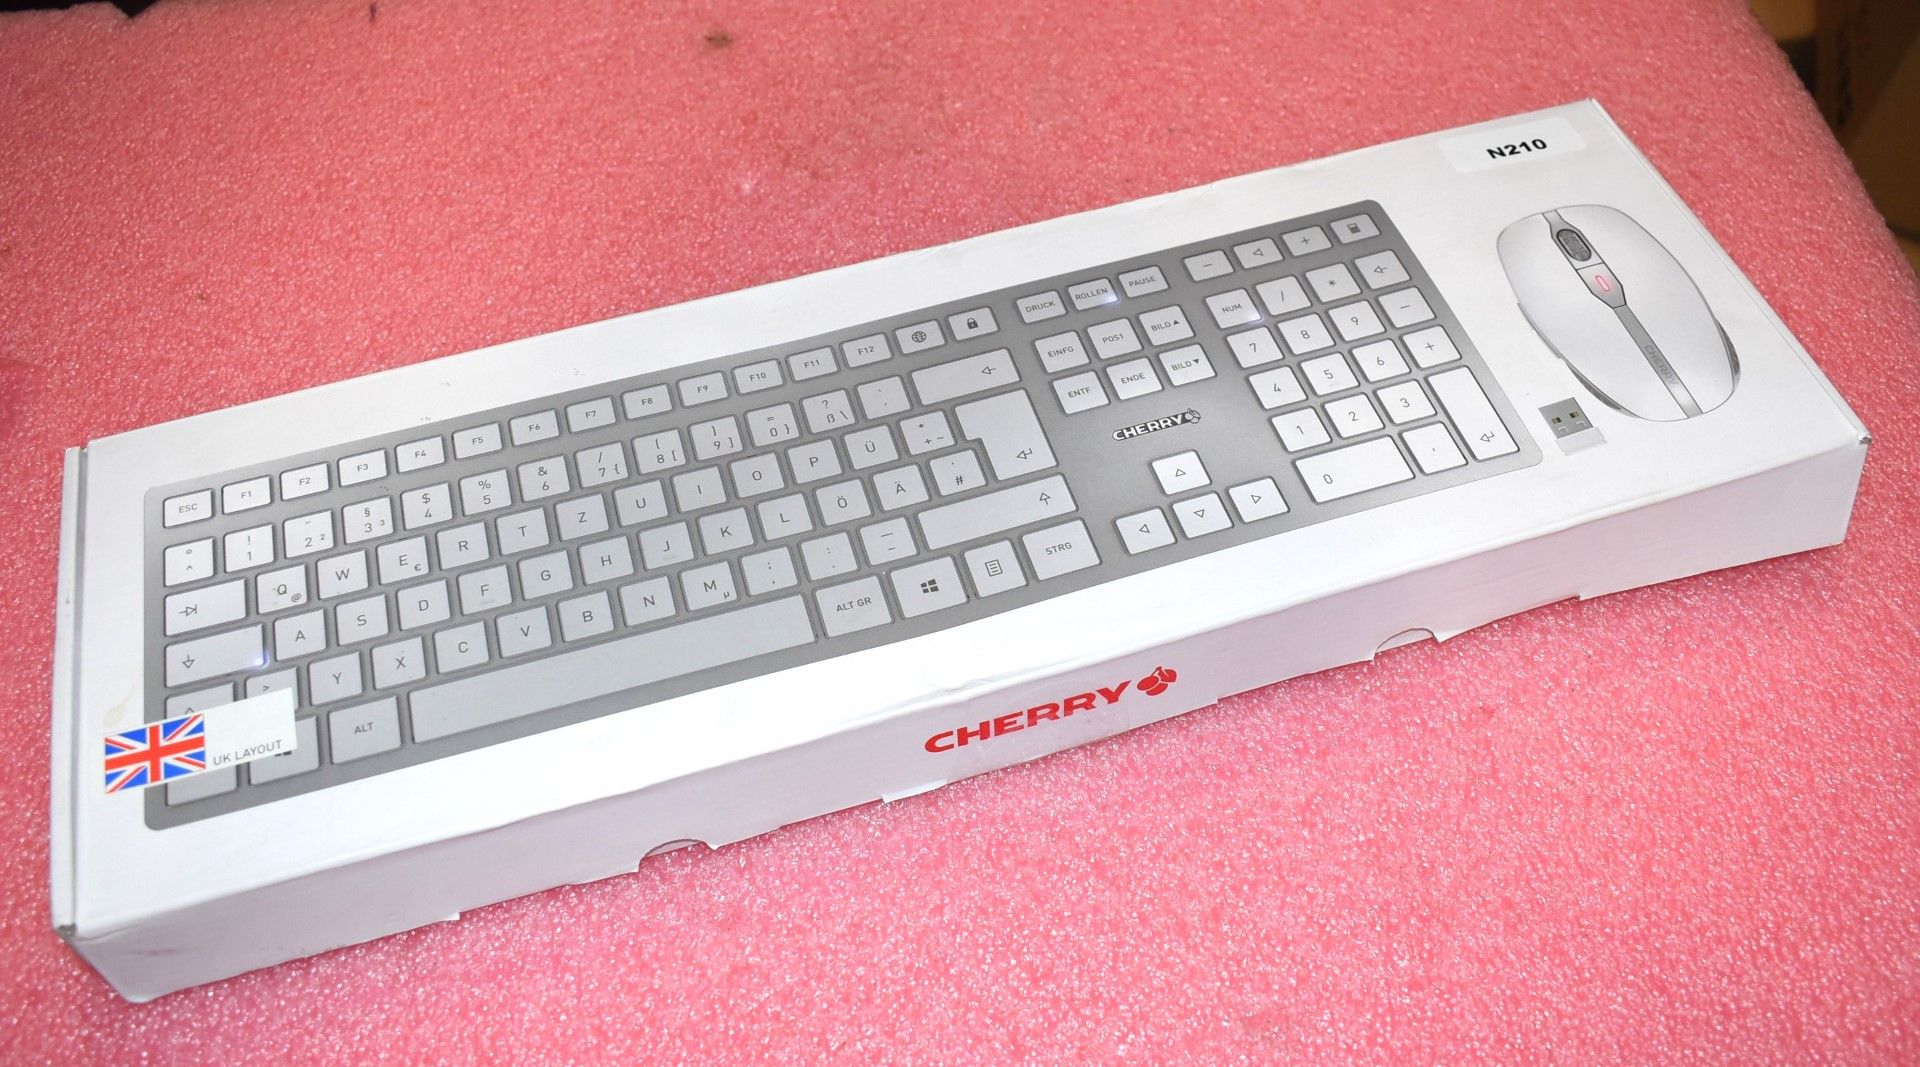 1 x Cherry DW9000 Slim Rechargable Wireless Keyboard and Mouse - Open Box Stock - Image 5 of 6